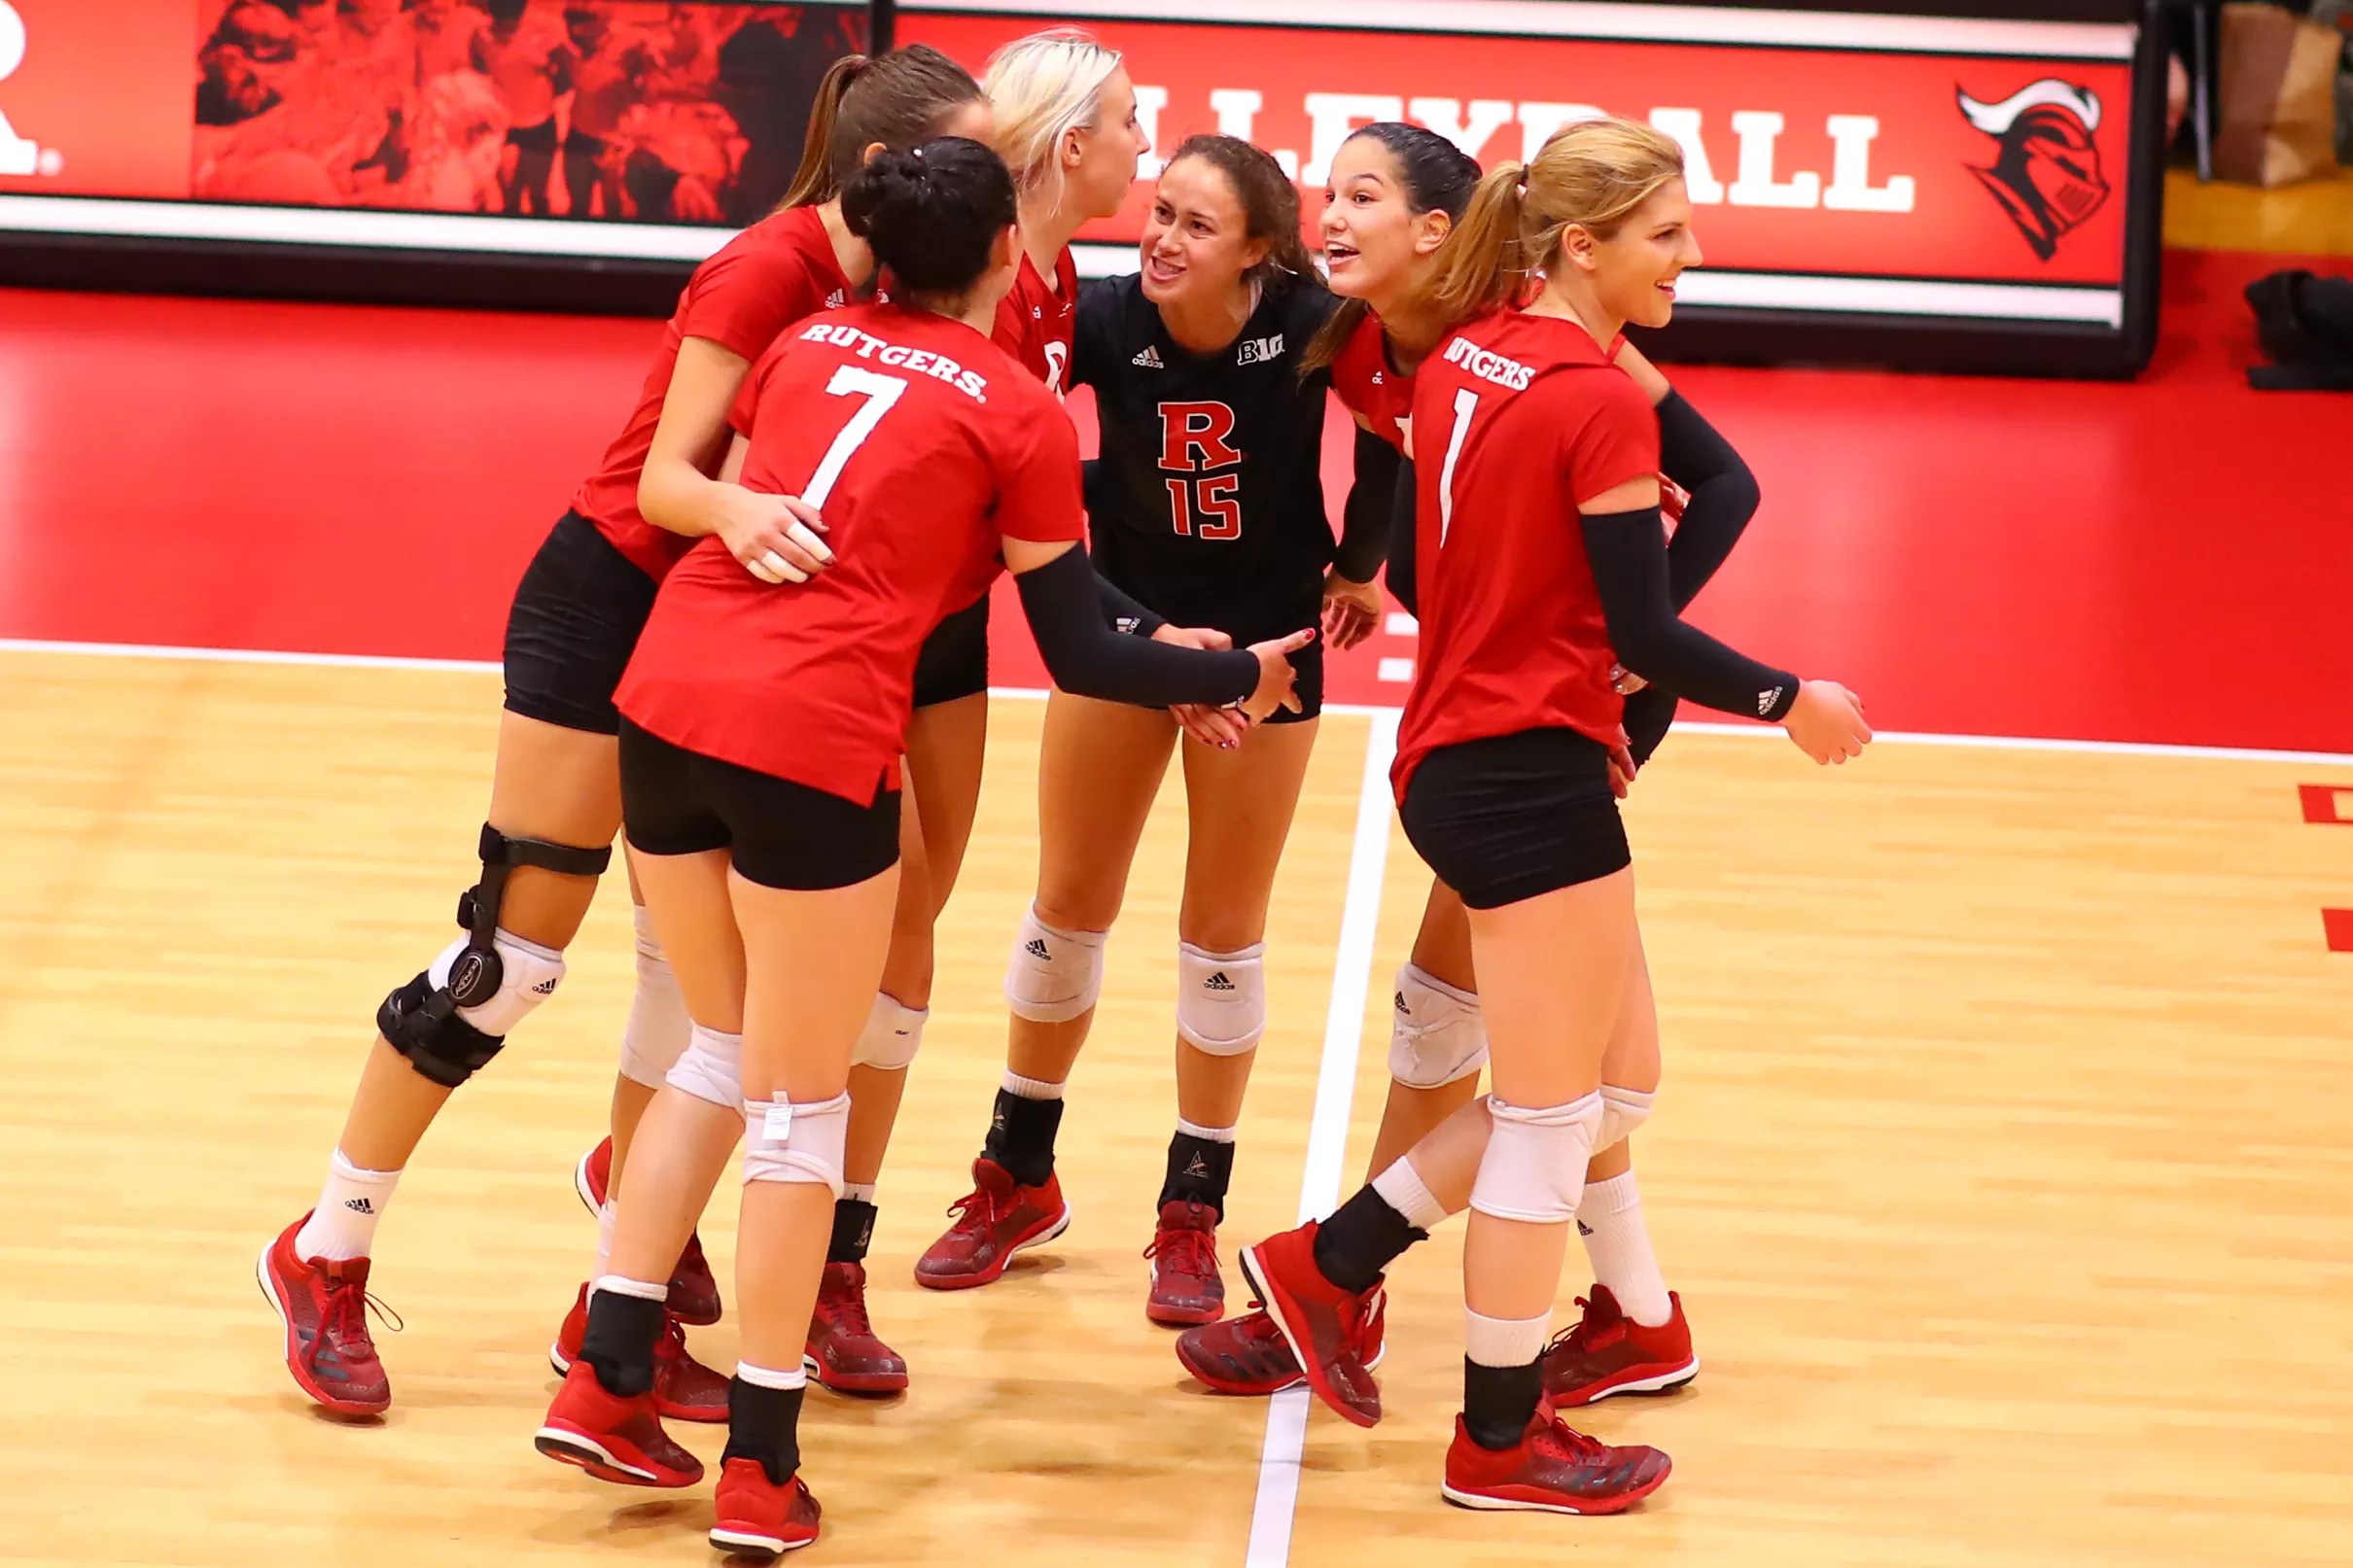 Rutgers Volleyball claims second consecutive tournament title to